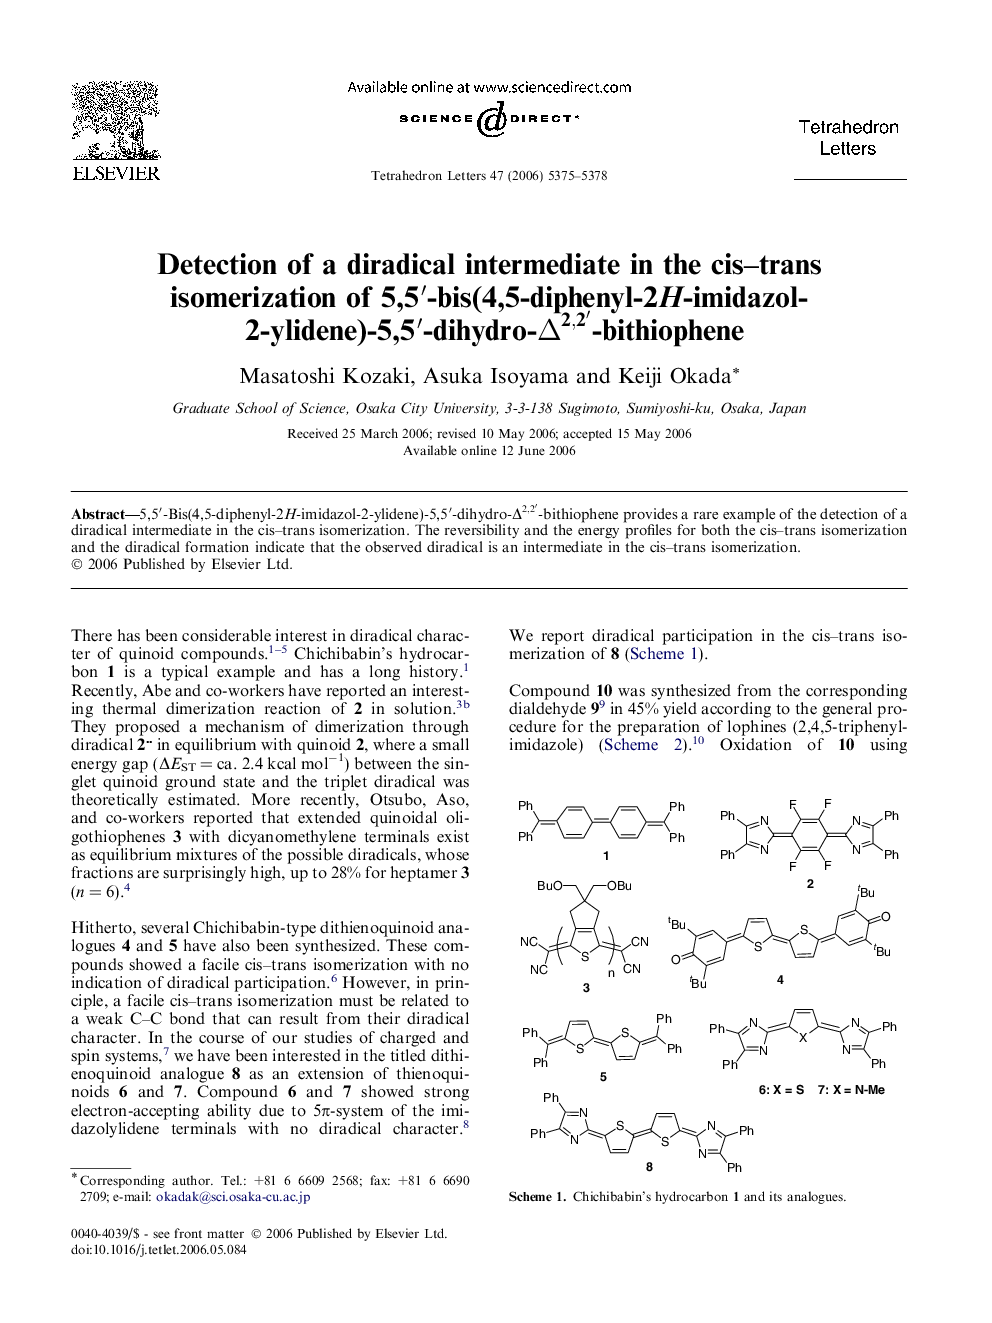 Detection of a diradical intermediate in the cis-trans isomerization of 5,5â²-bis(4,5-diphenyl-2H-imidazol-2-ylidene)-5,5â²-dihydro-Î2,2â²-bithiophene